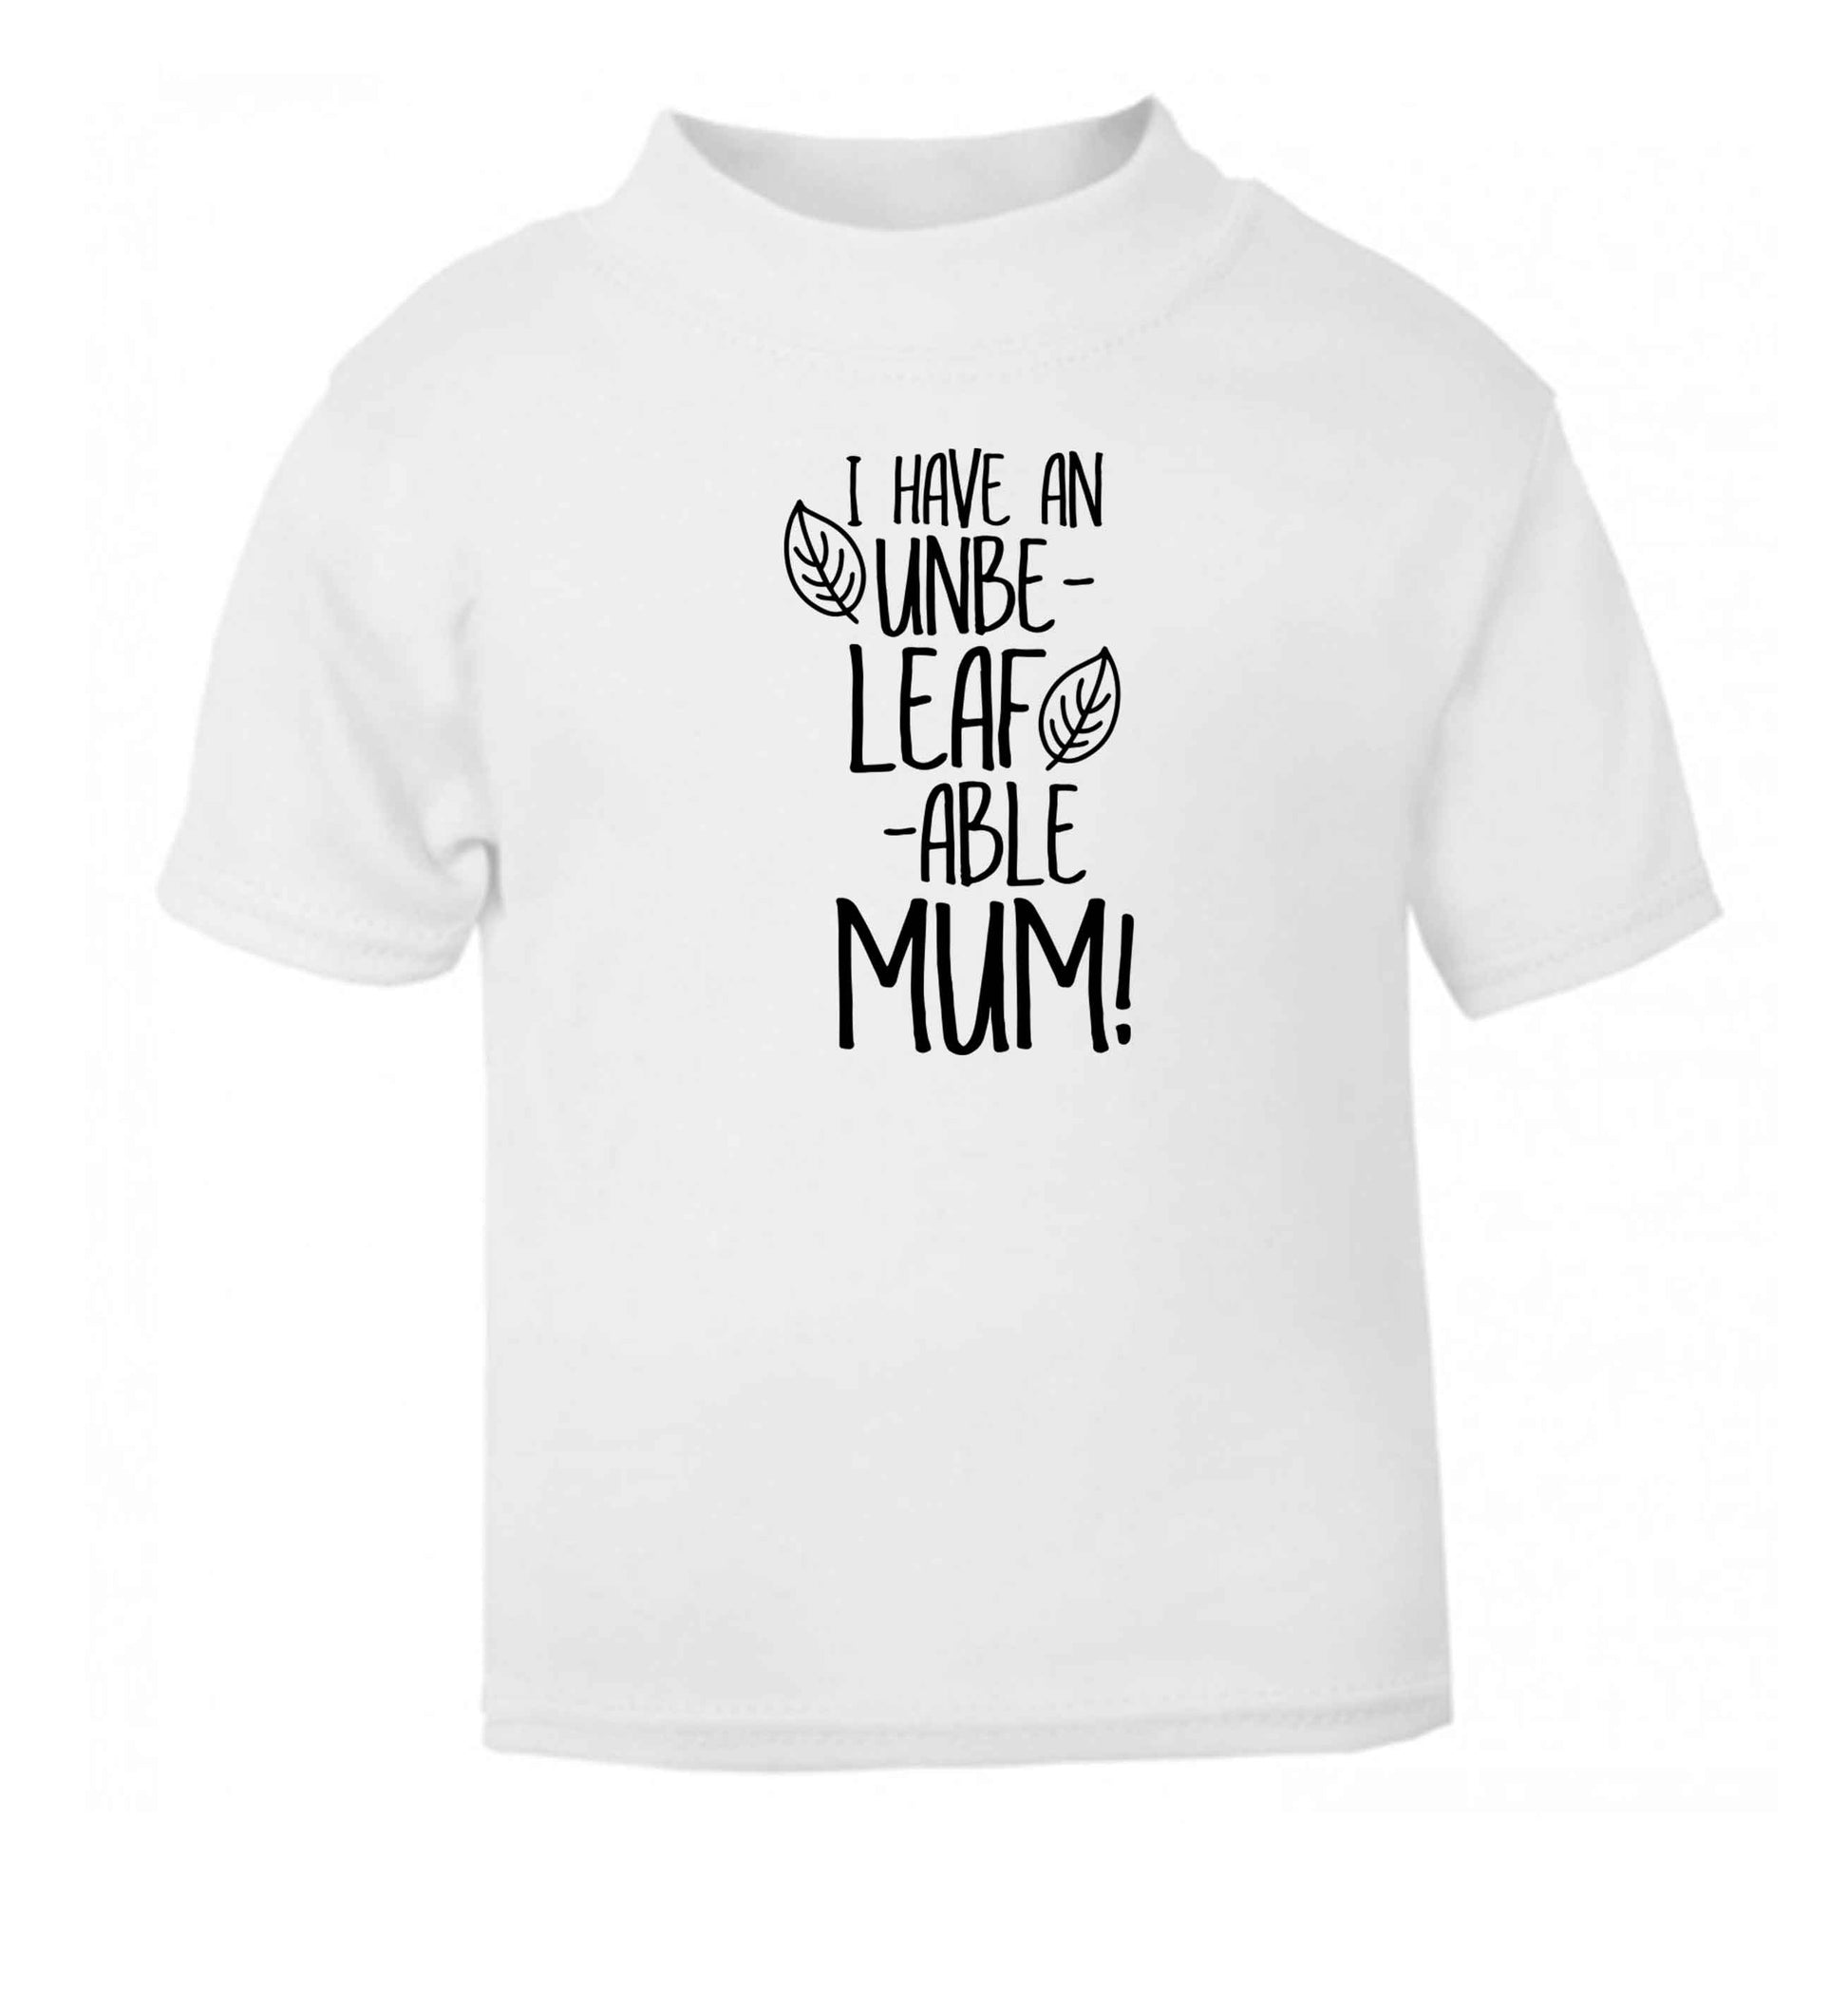 I have an unbeleafable mum! white baby toddler Tshirt 2 Years